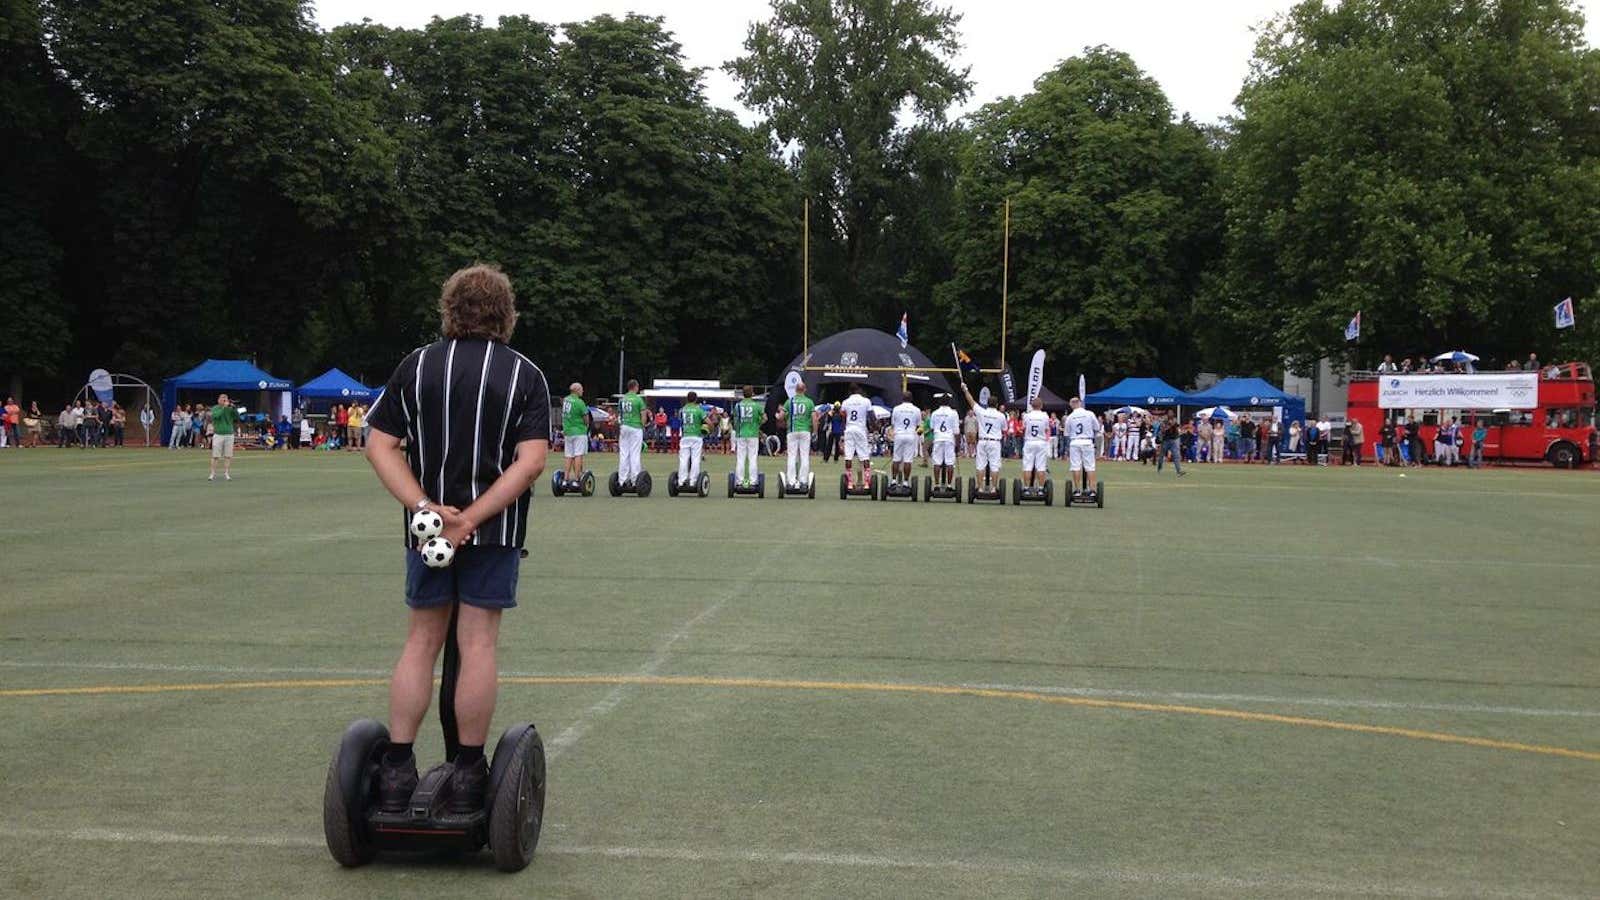 Steve Wozniak played in this year’s Segway polo world championships